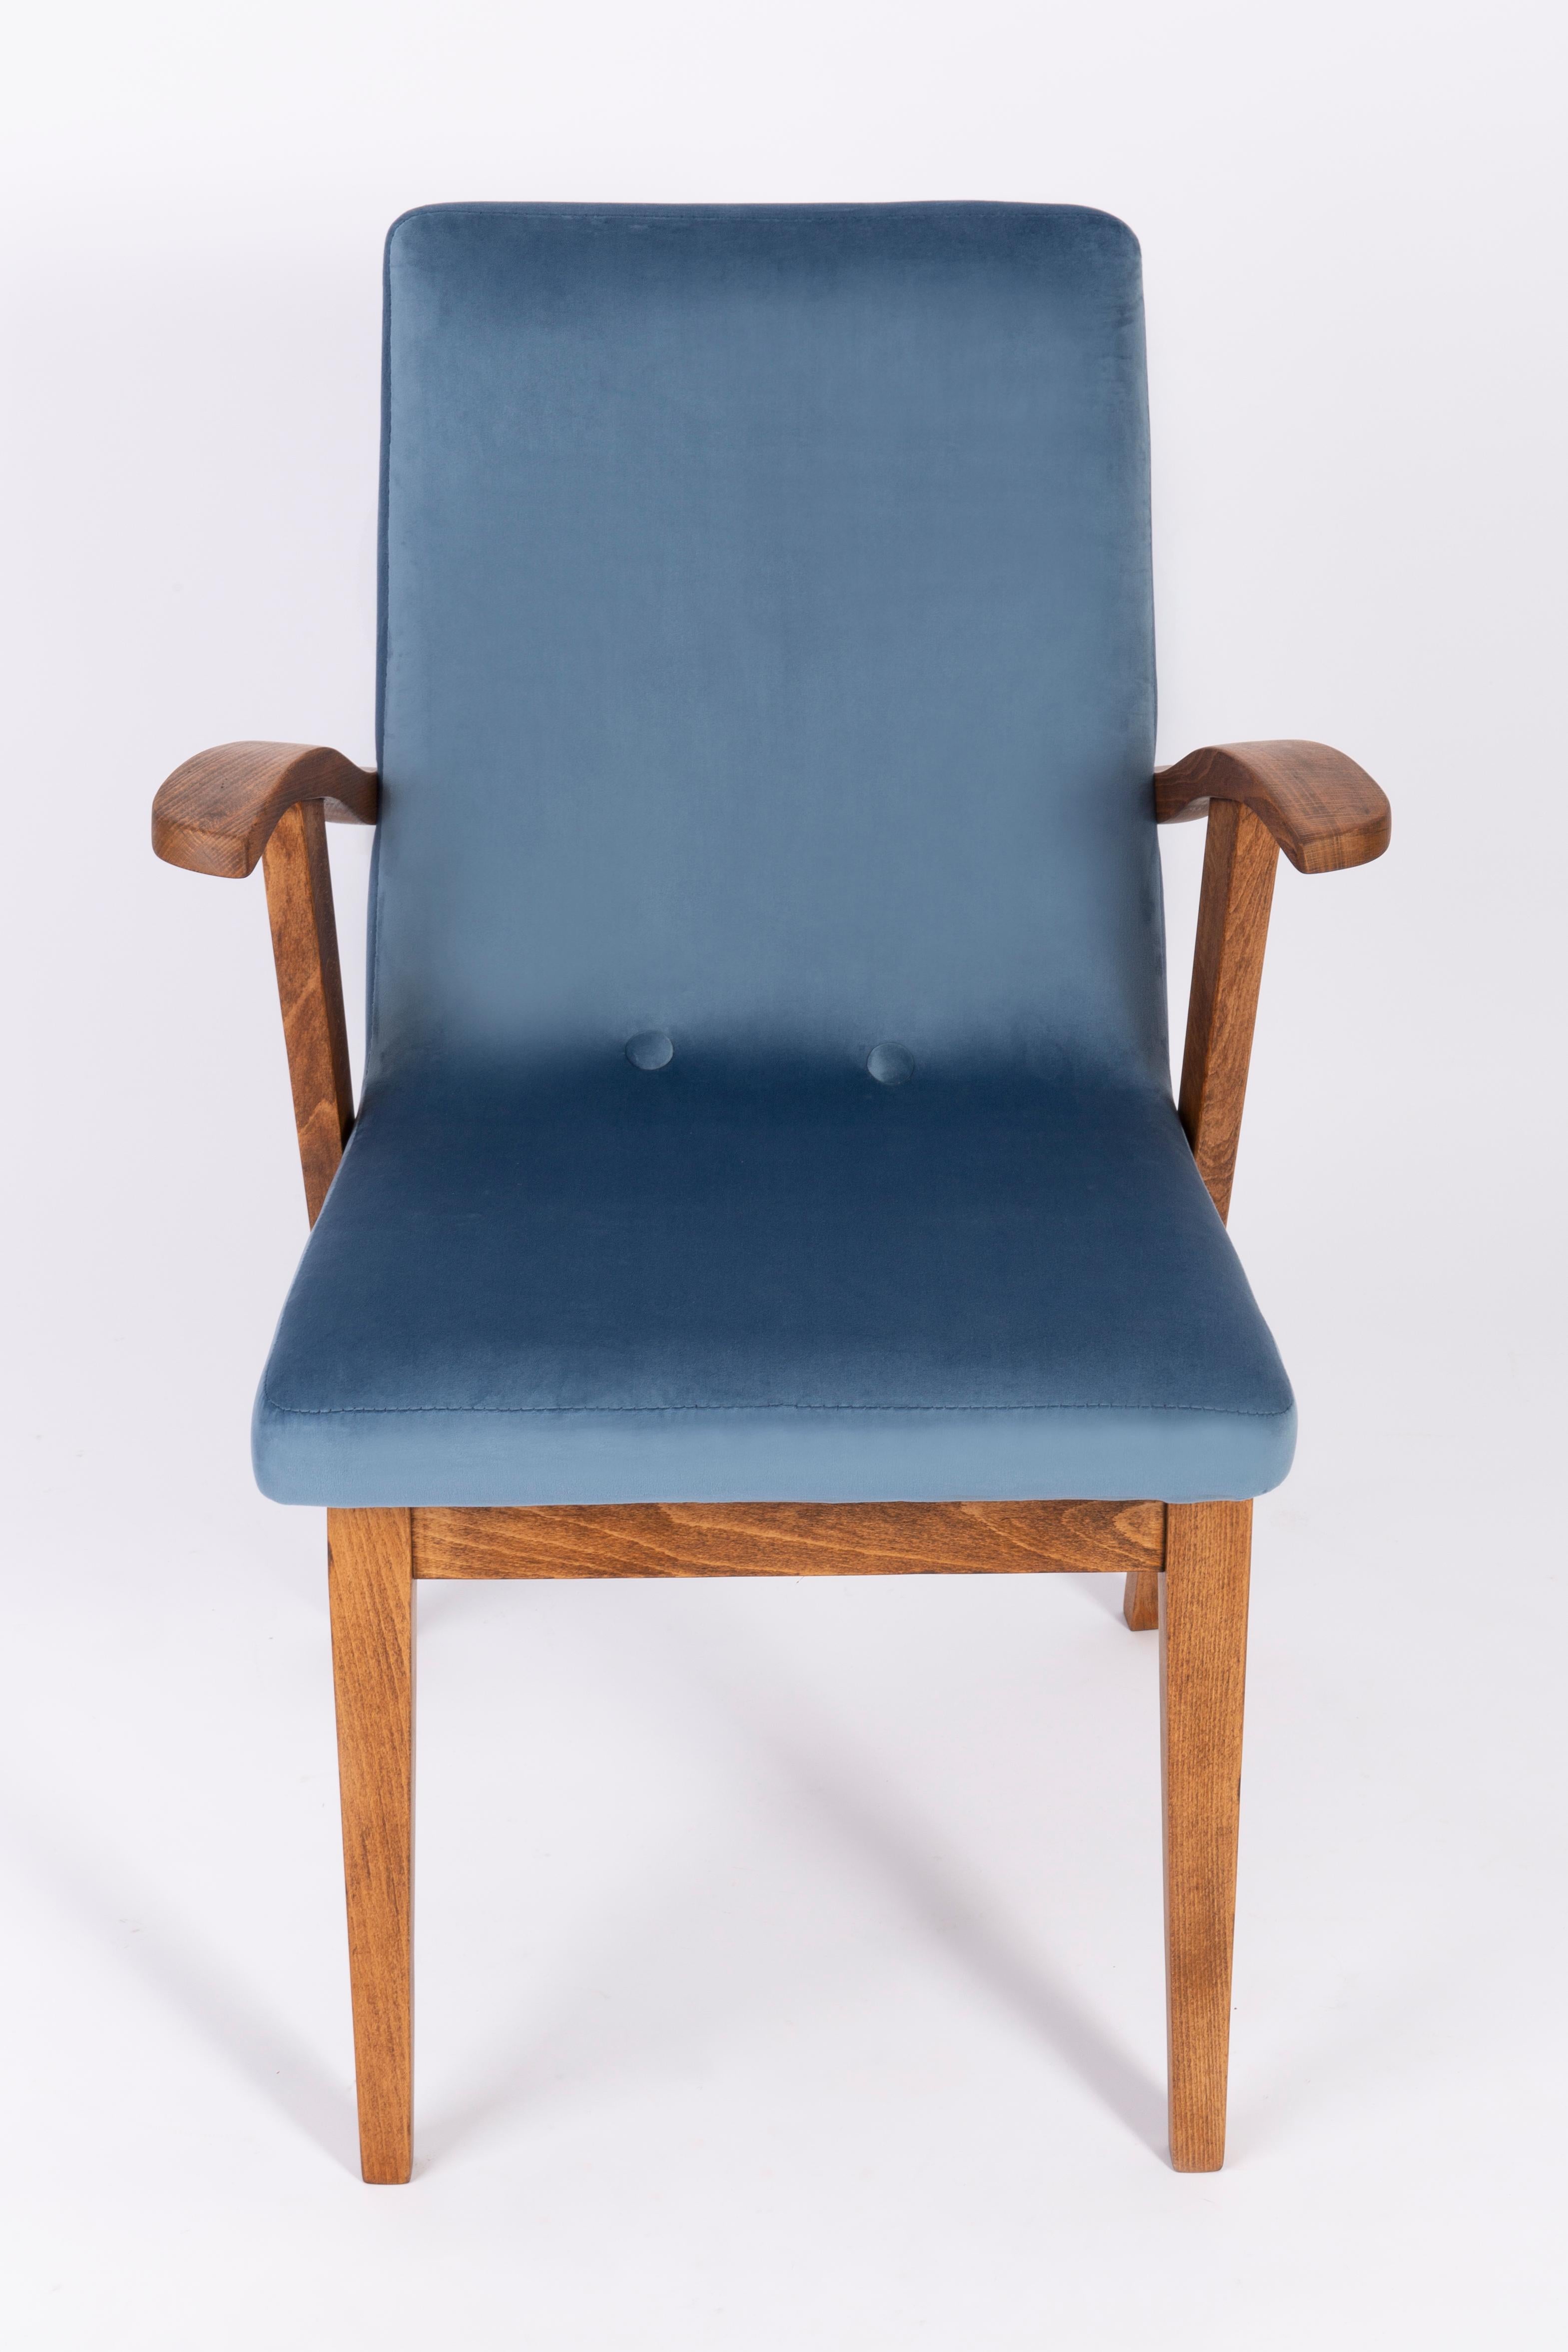 Hand-Crafted Set of Six 20th Century Vintage Blue Chairs by Mieczyslaw Puchala, 1960s For Sale